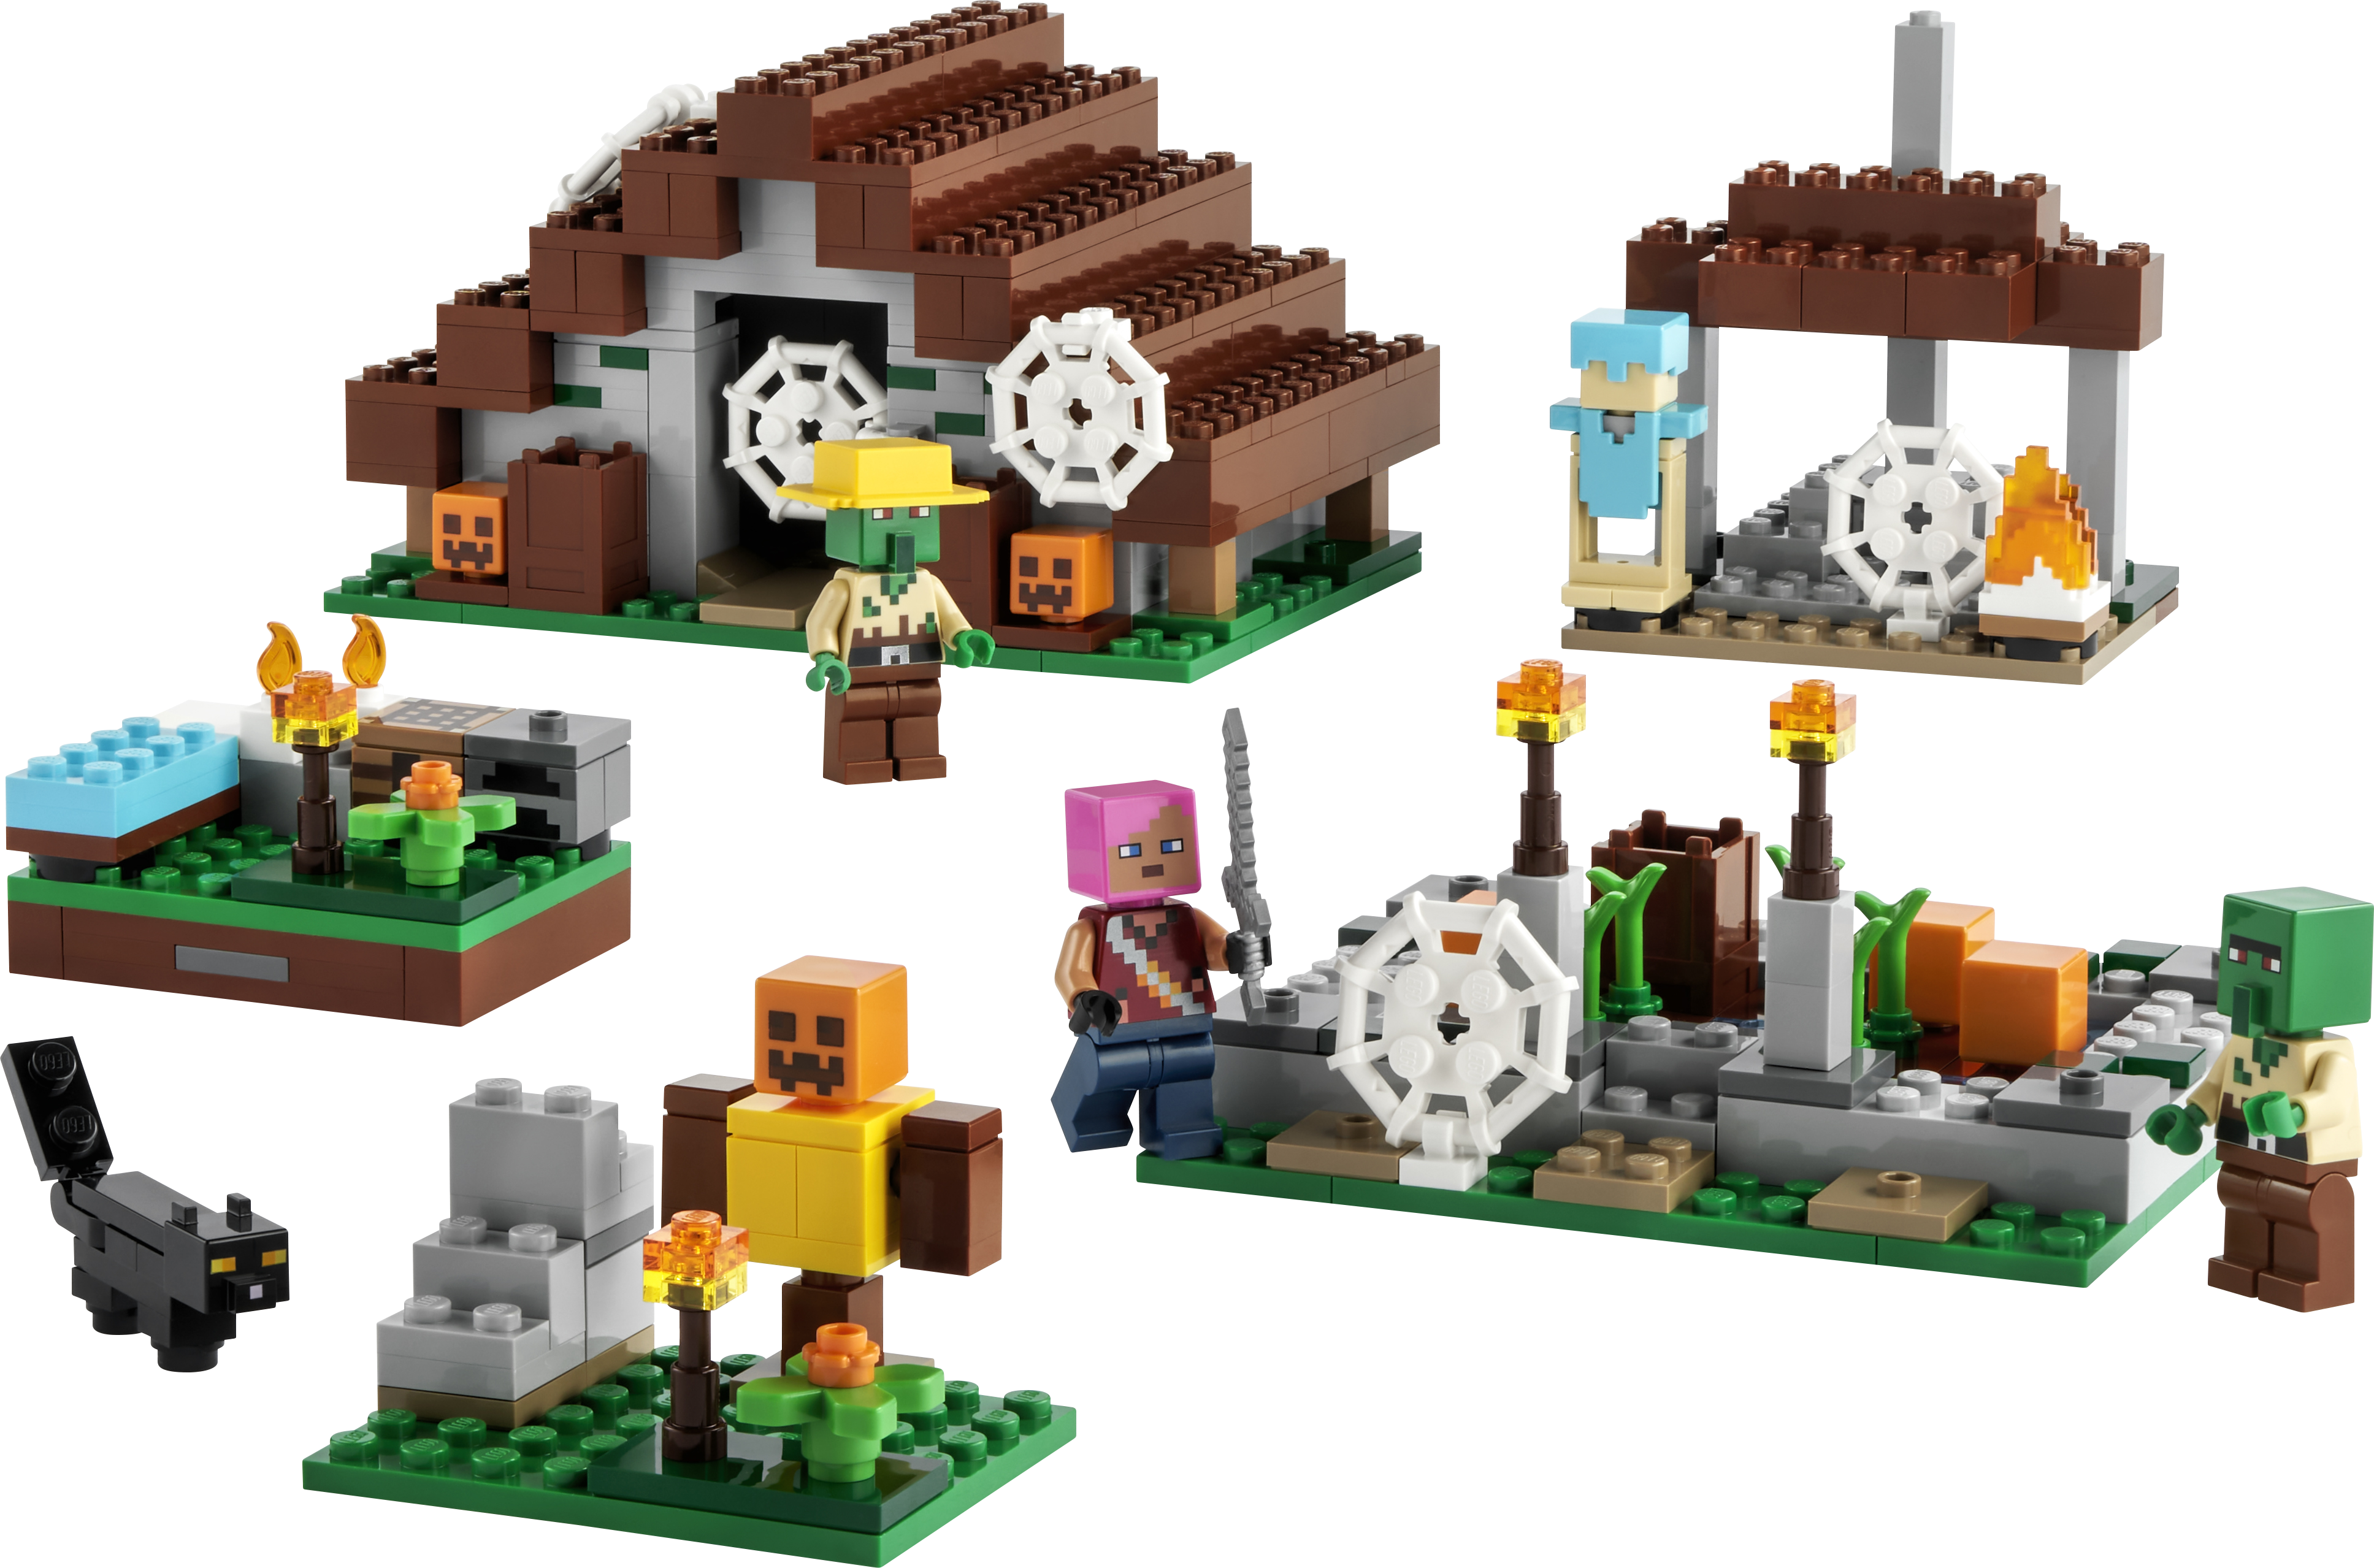 Five new inclusions in the summer 2022 LEGO sets